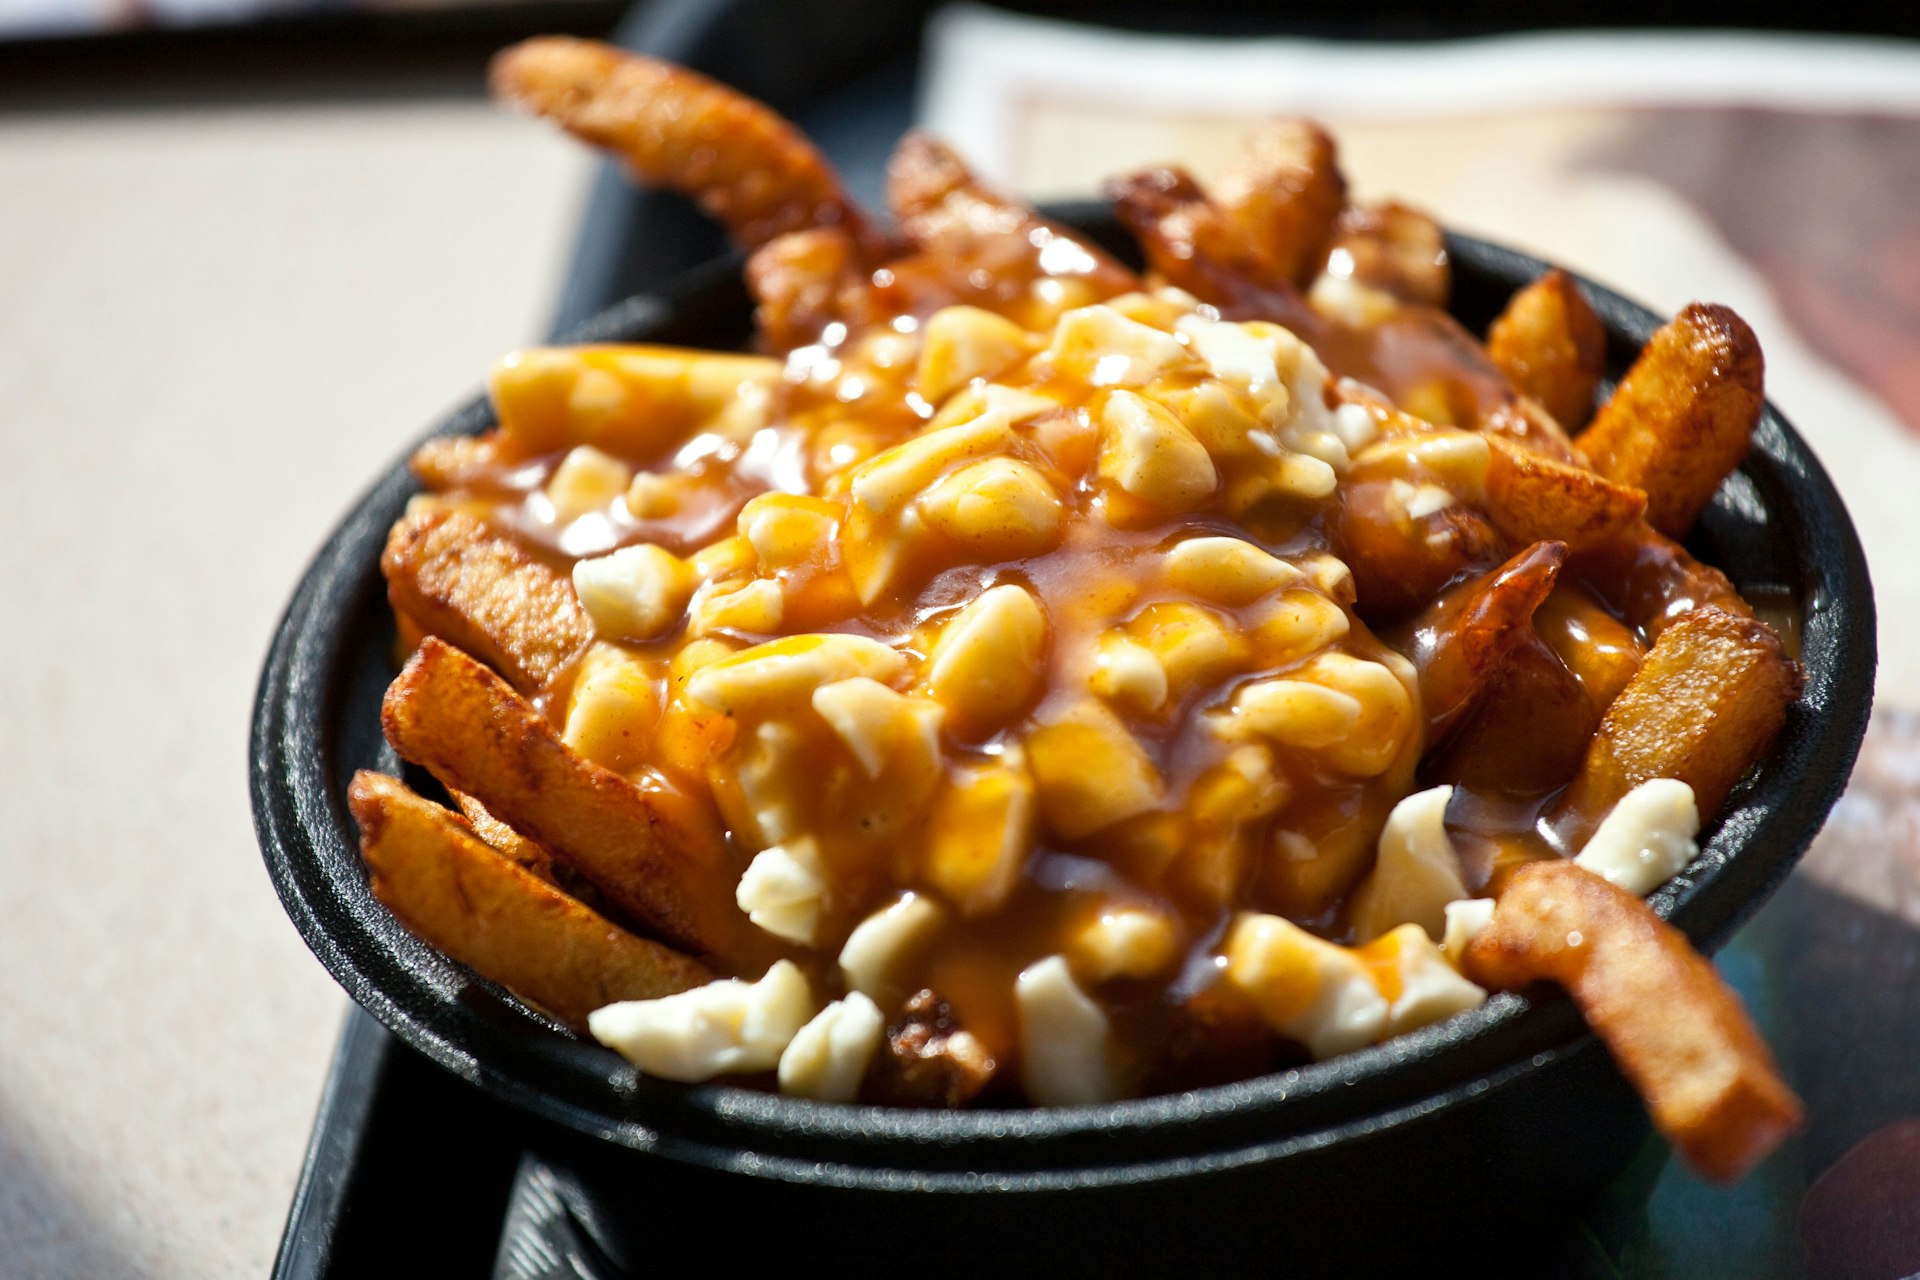 Closeup of poutine at La Belle Province restaurant in Montreal, Canada